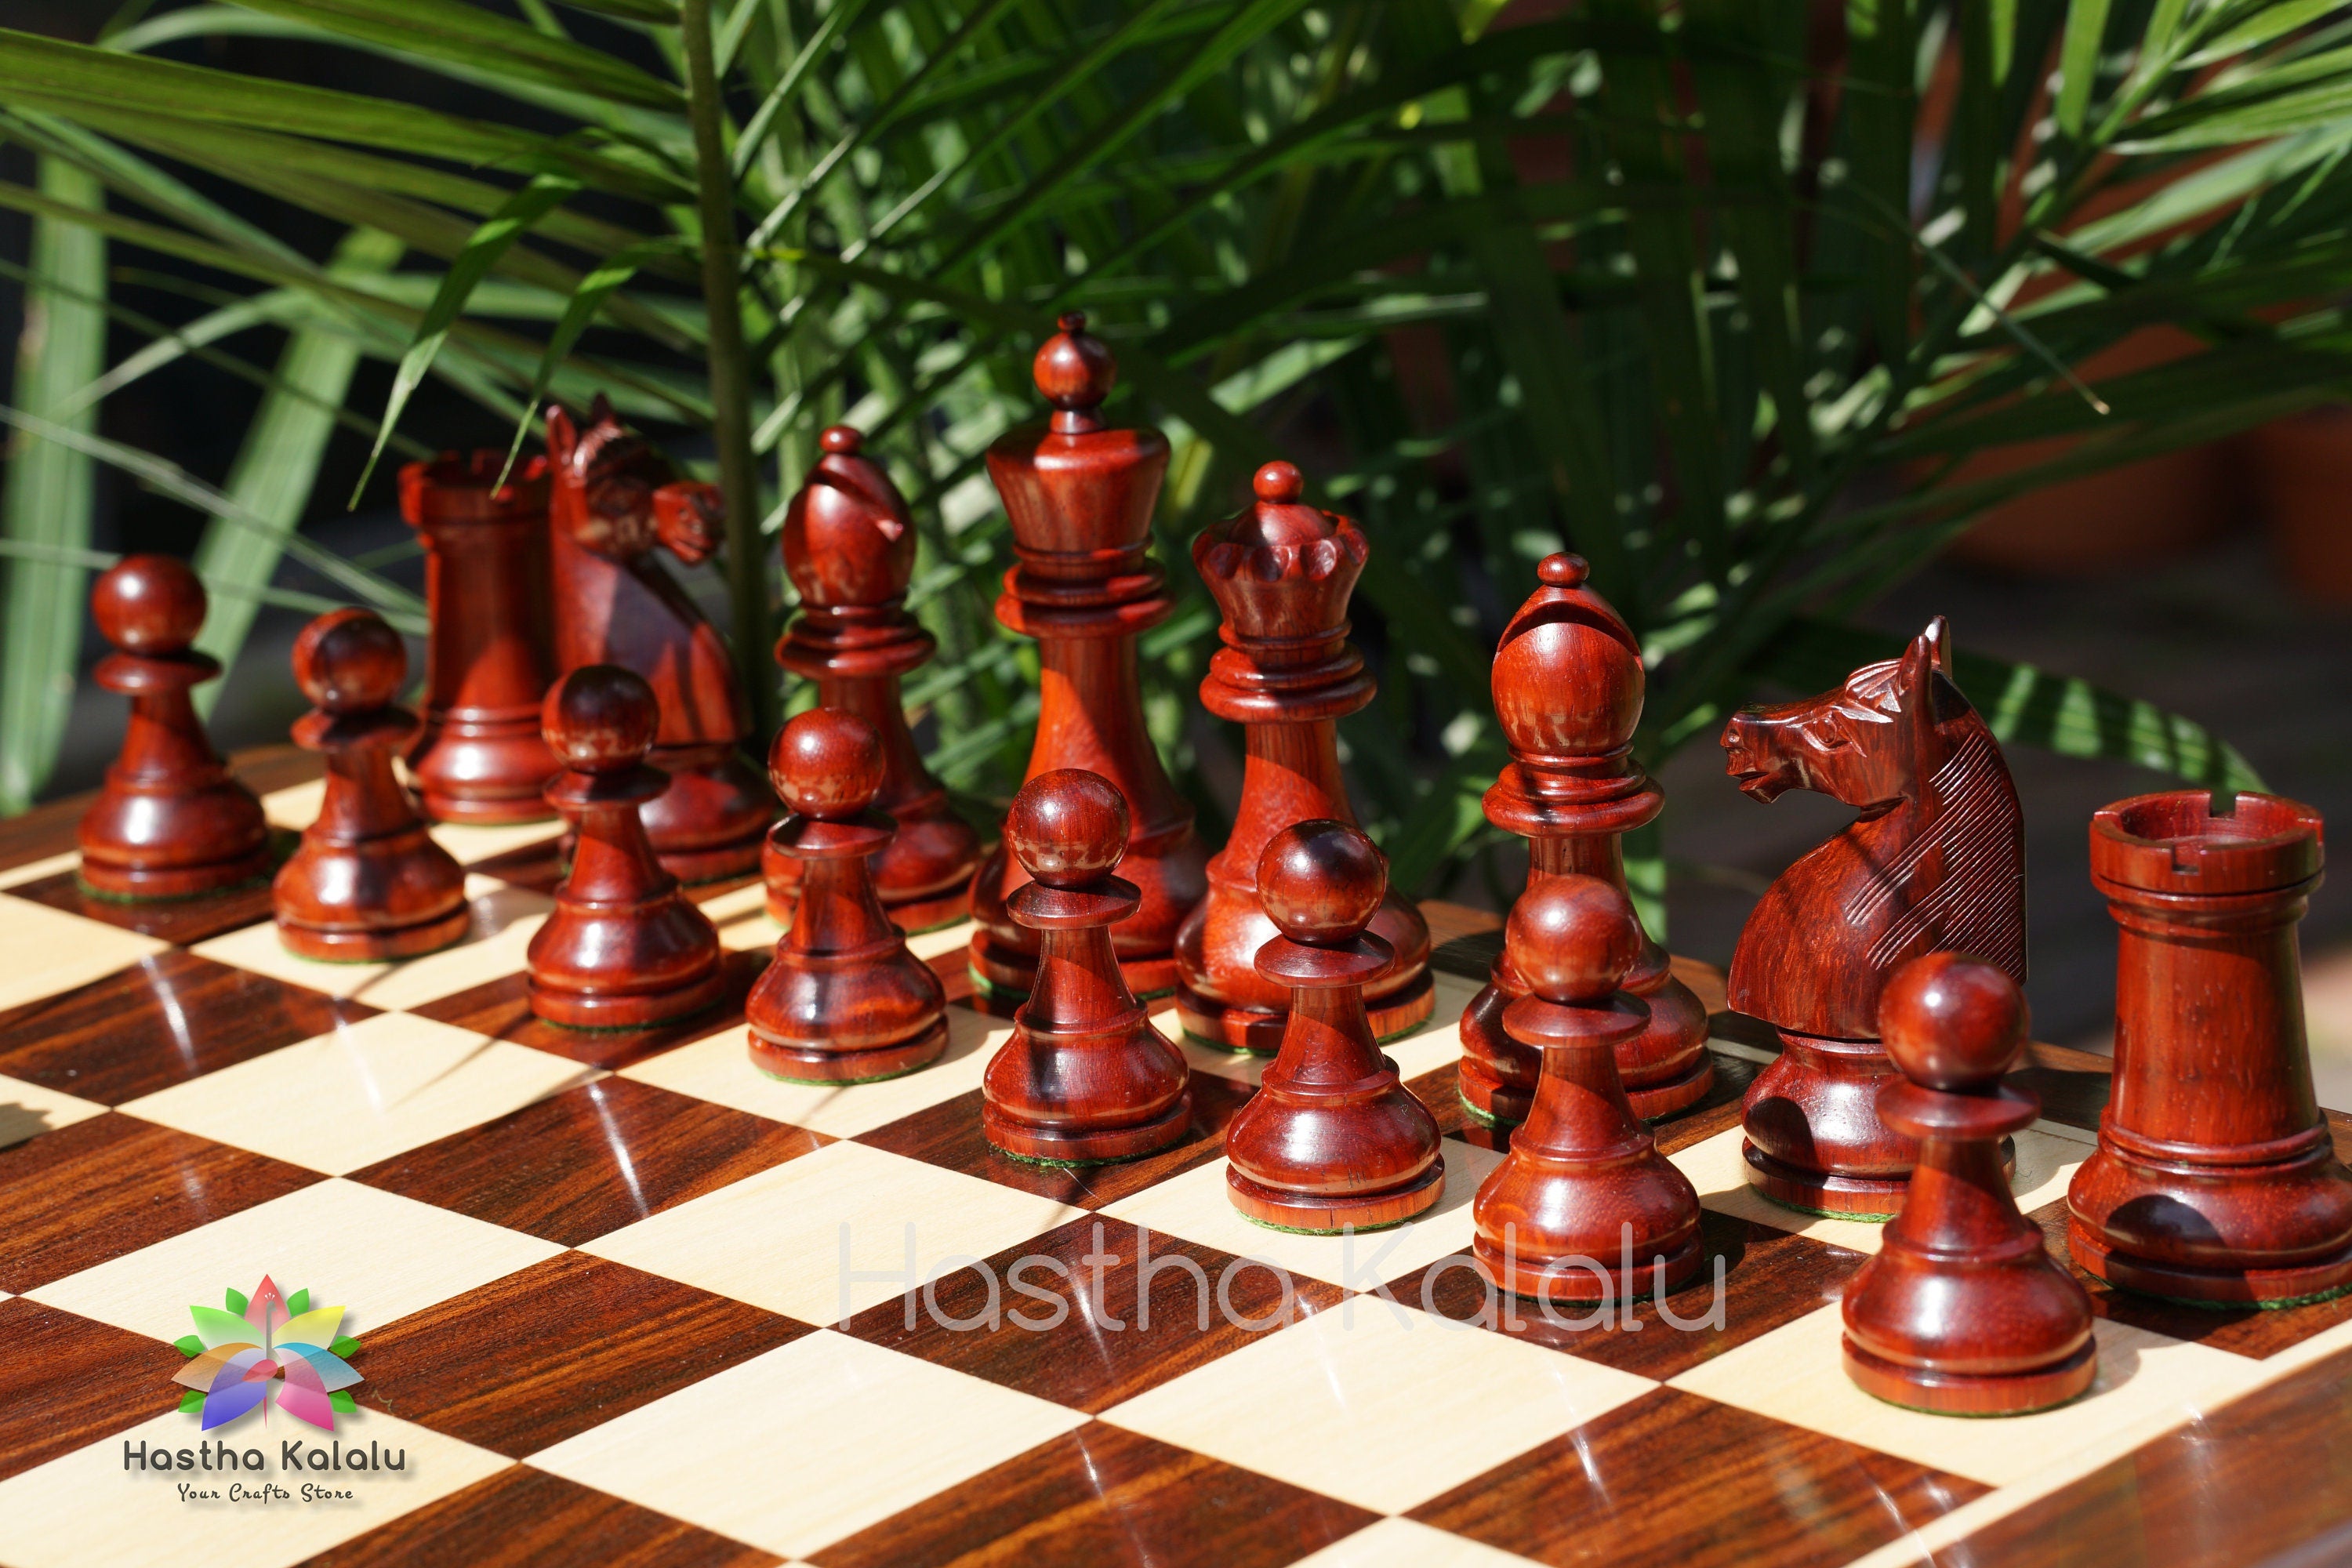 1920 German Collectors Budrosewood Staunton Style Chess Pieces with Anjanwood Board